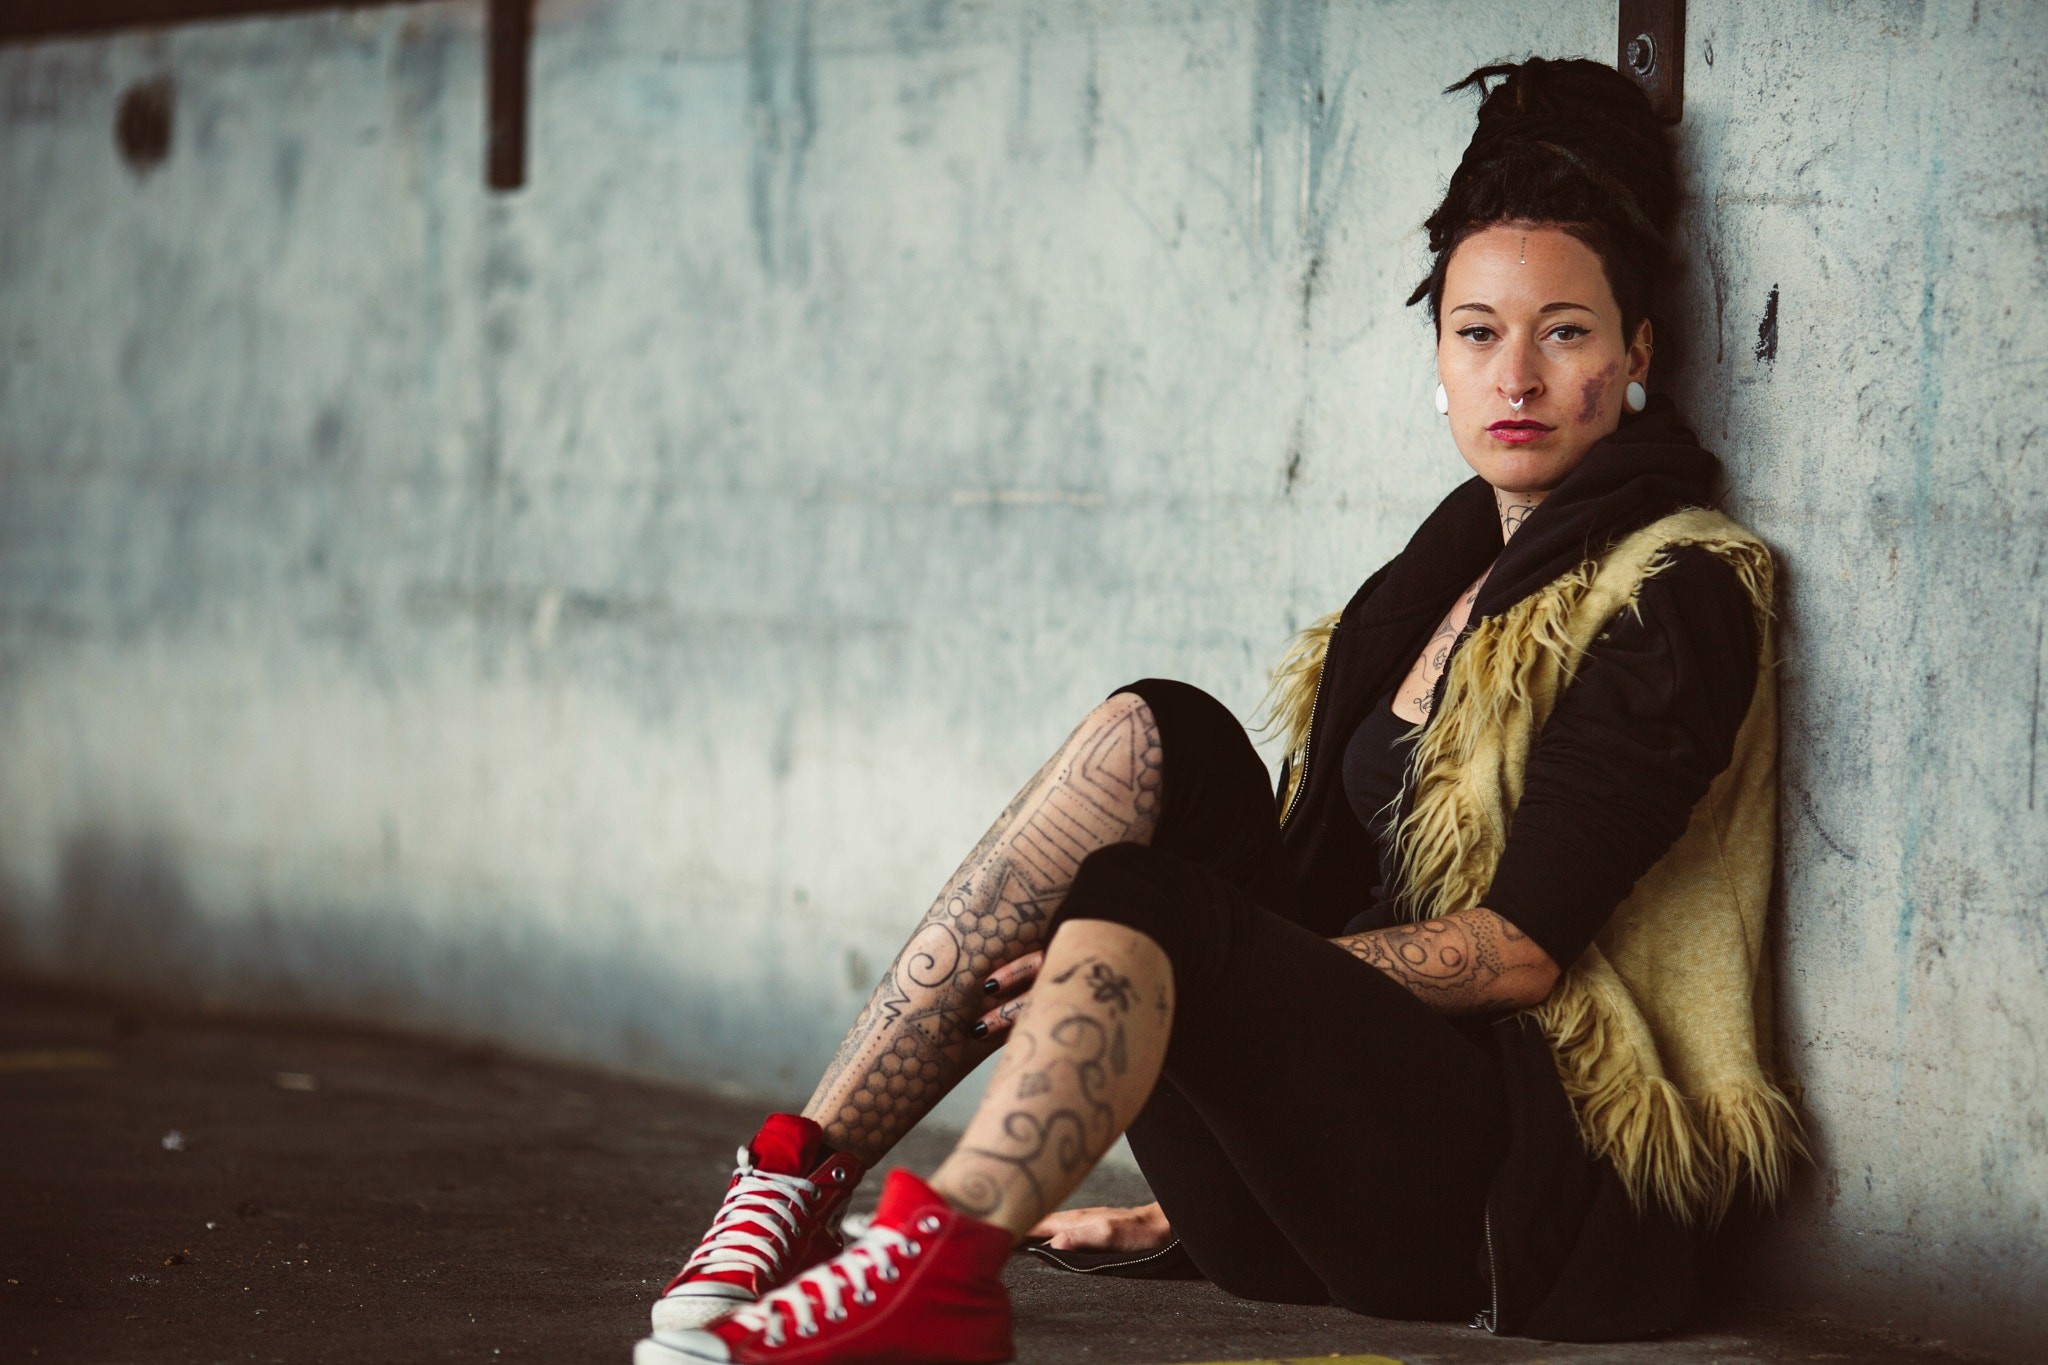 Sitting Women Legs Red Shoes Tattoo Urban Women Outdoors 500px Model DAVALi Photography 2048x1365